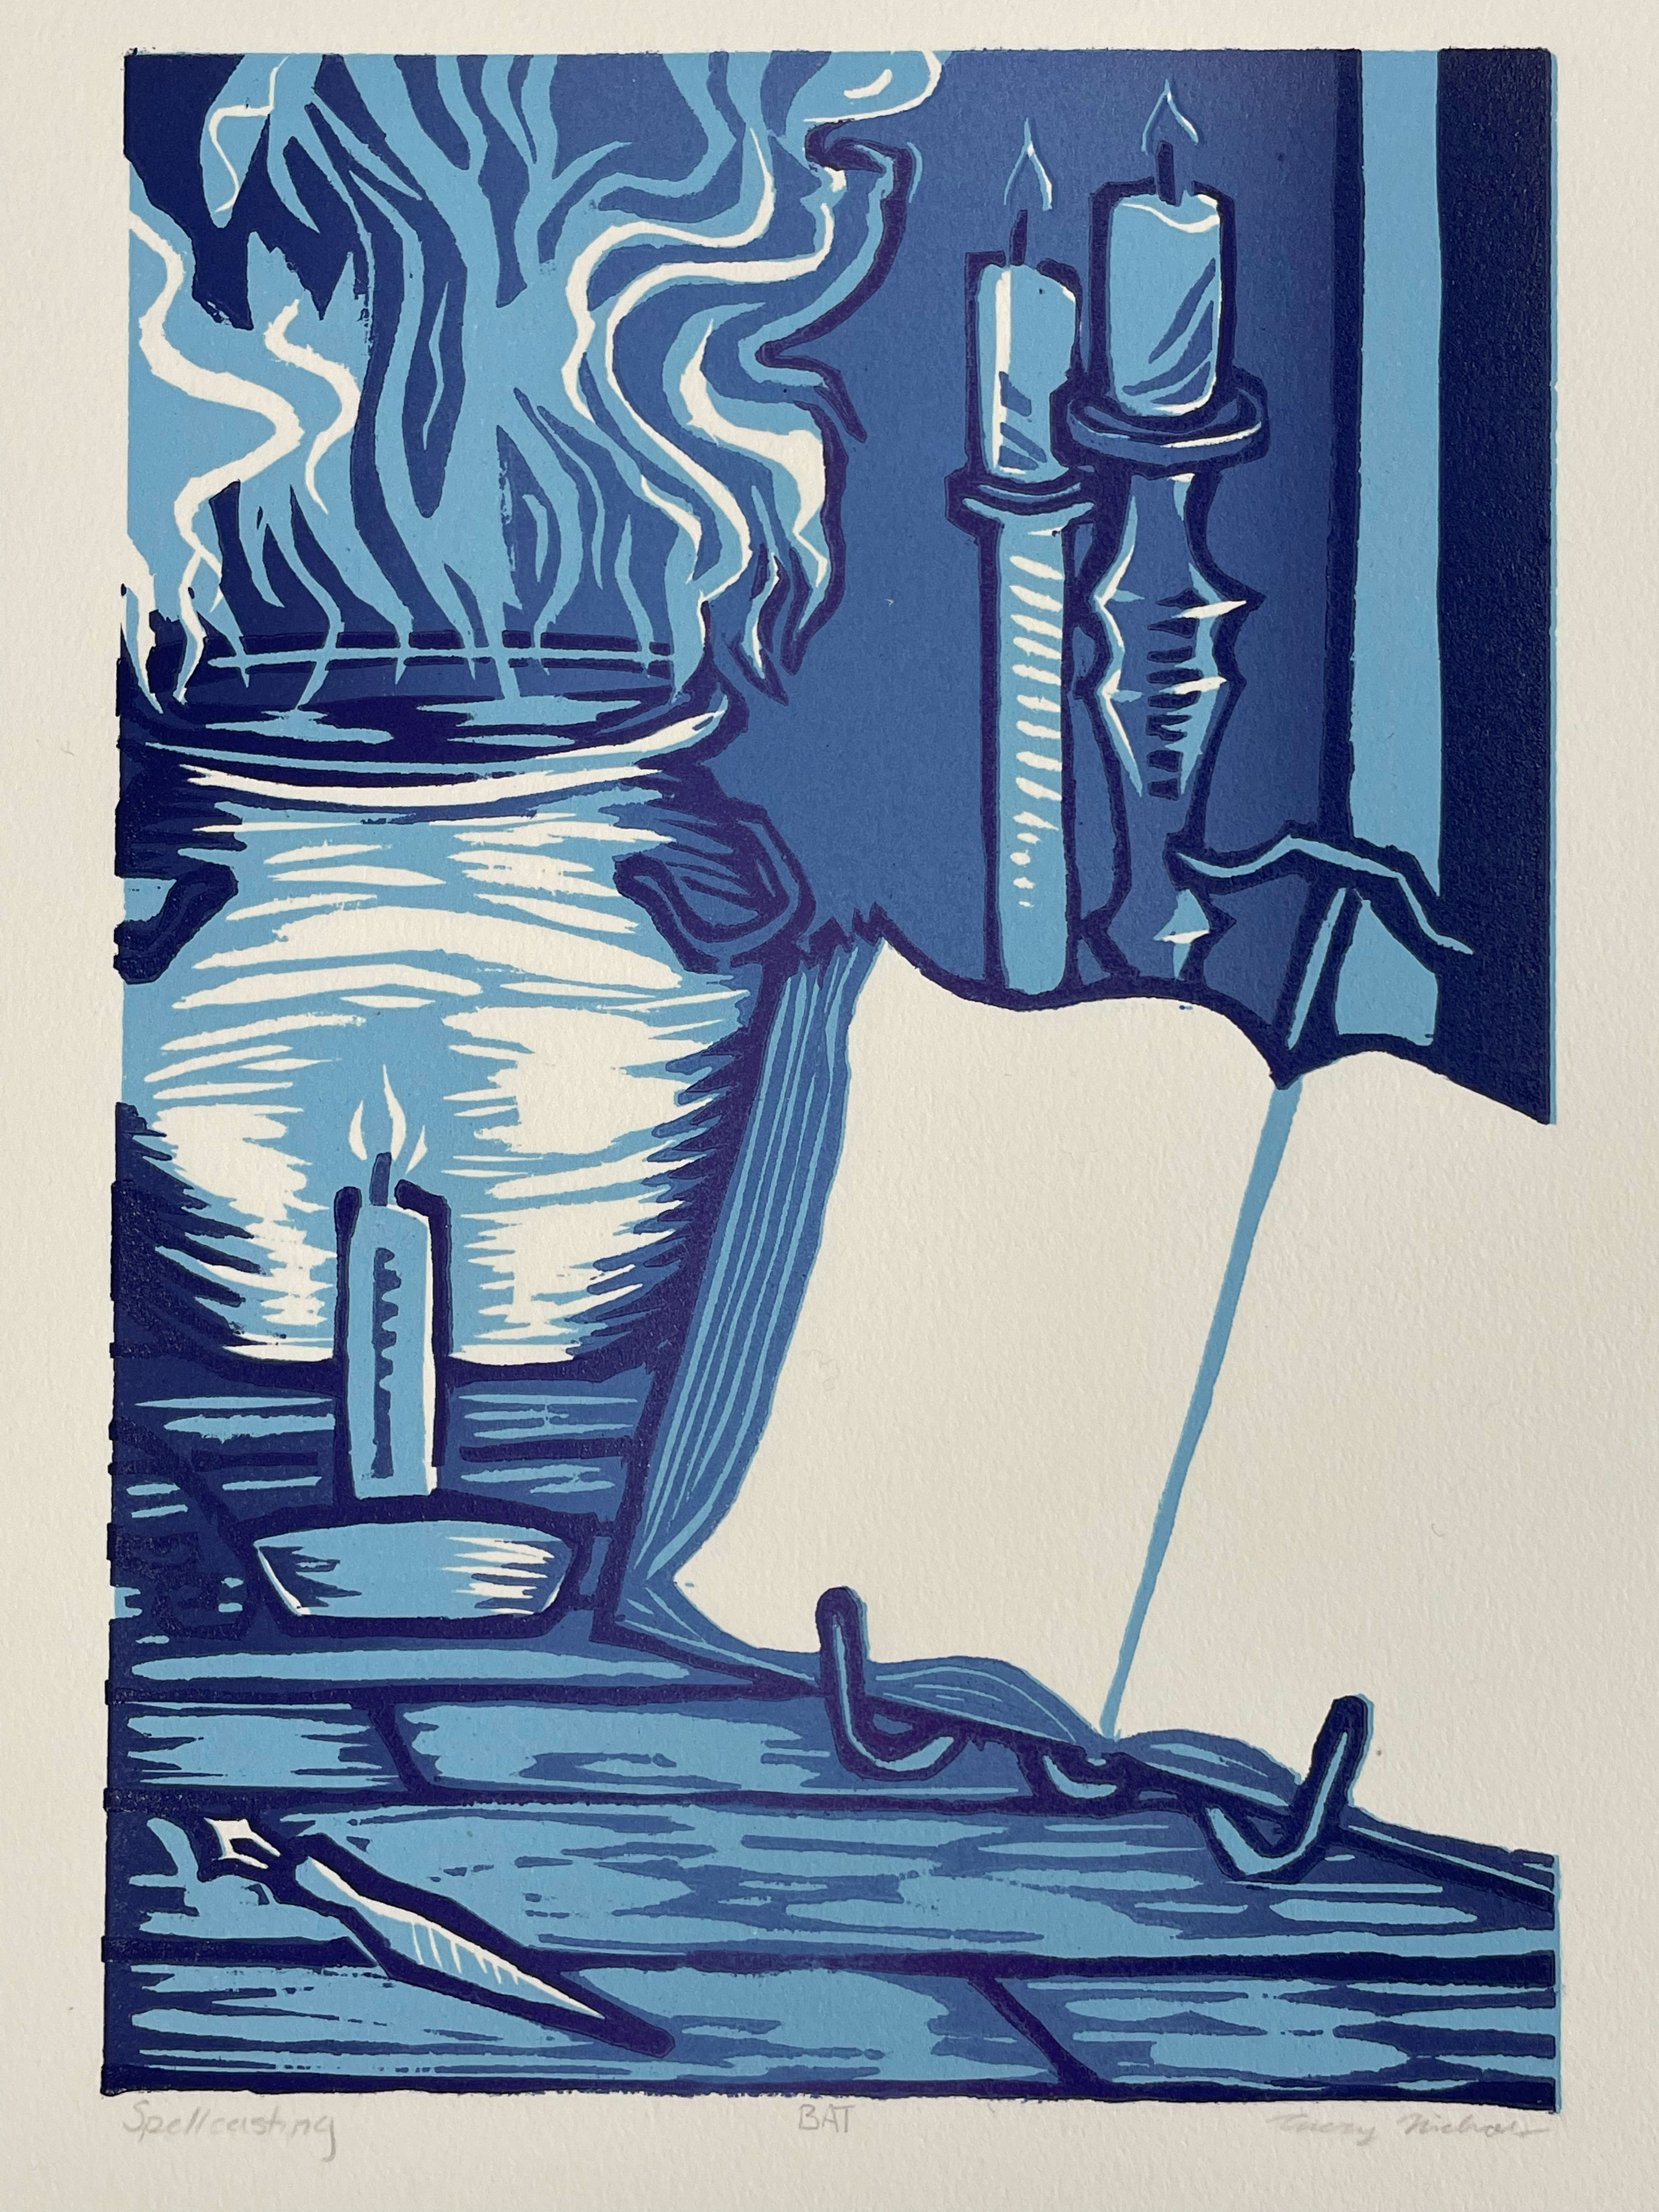 A printed image composed of candles, a book, and a cauldron- printed in several shades of blue.